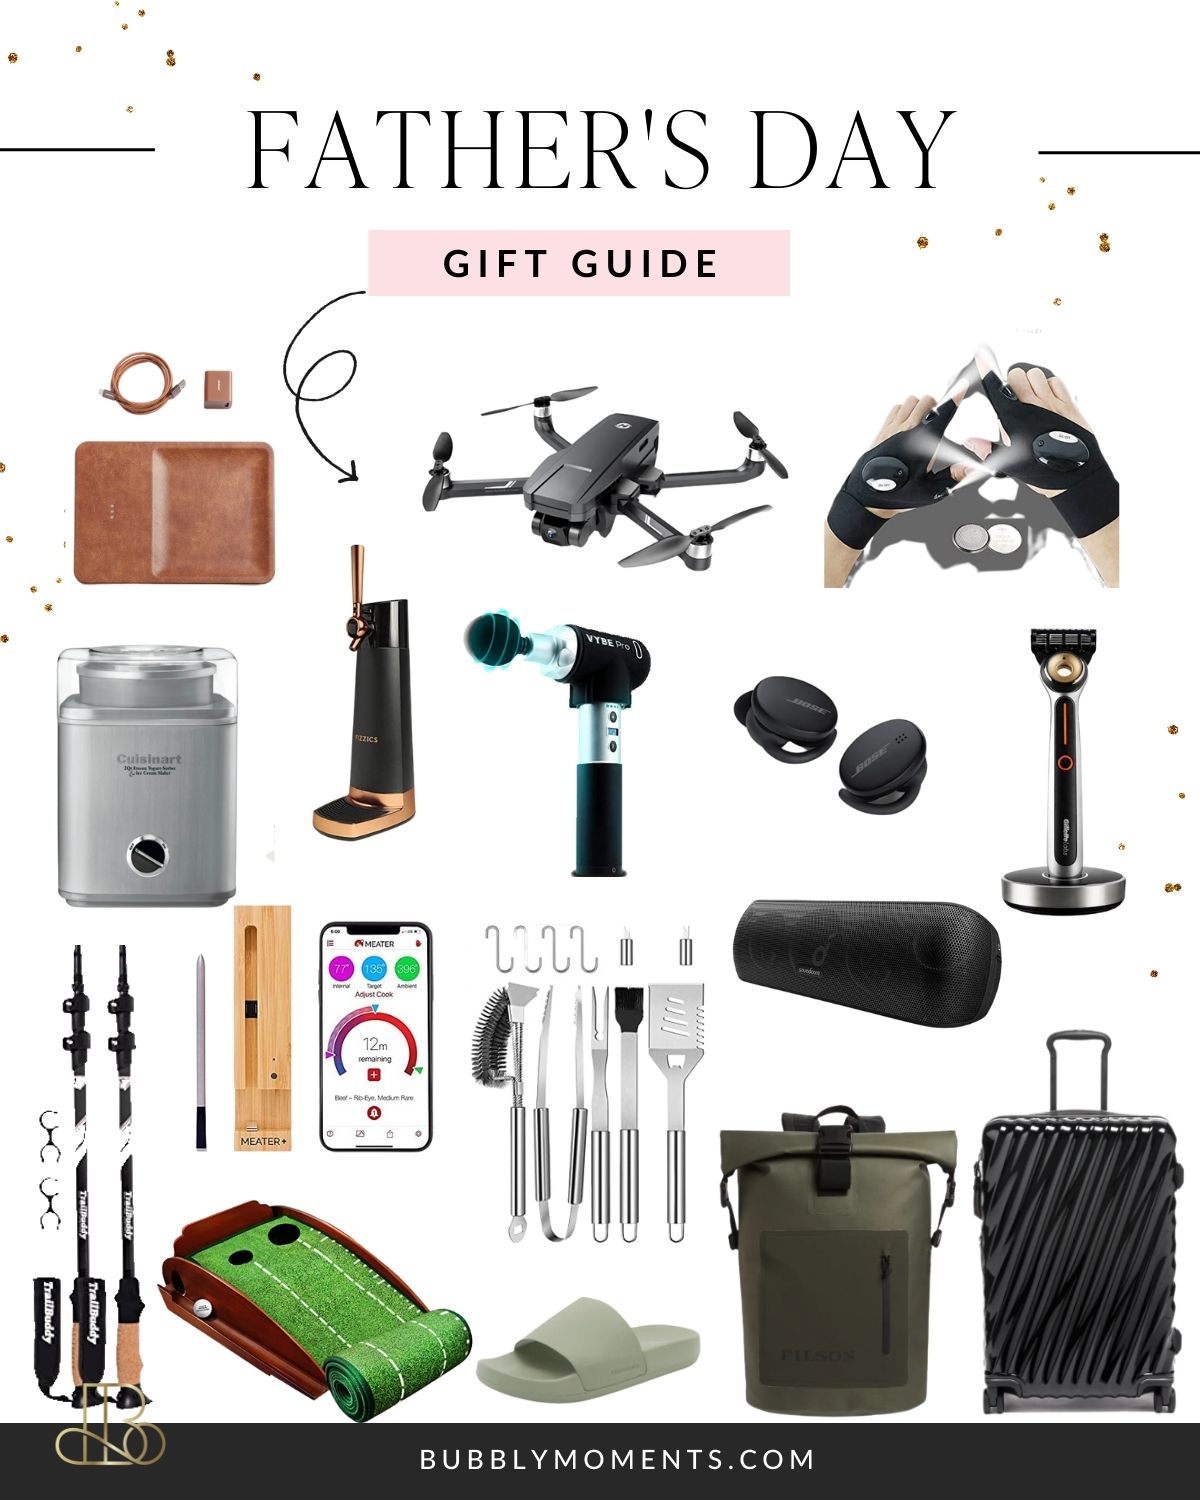 https://www.bubblymoments.com/wp-content/uploads/2022/06/bubbly-moments-fathers-day-gifts-1.jpg